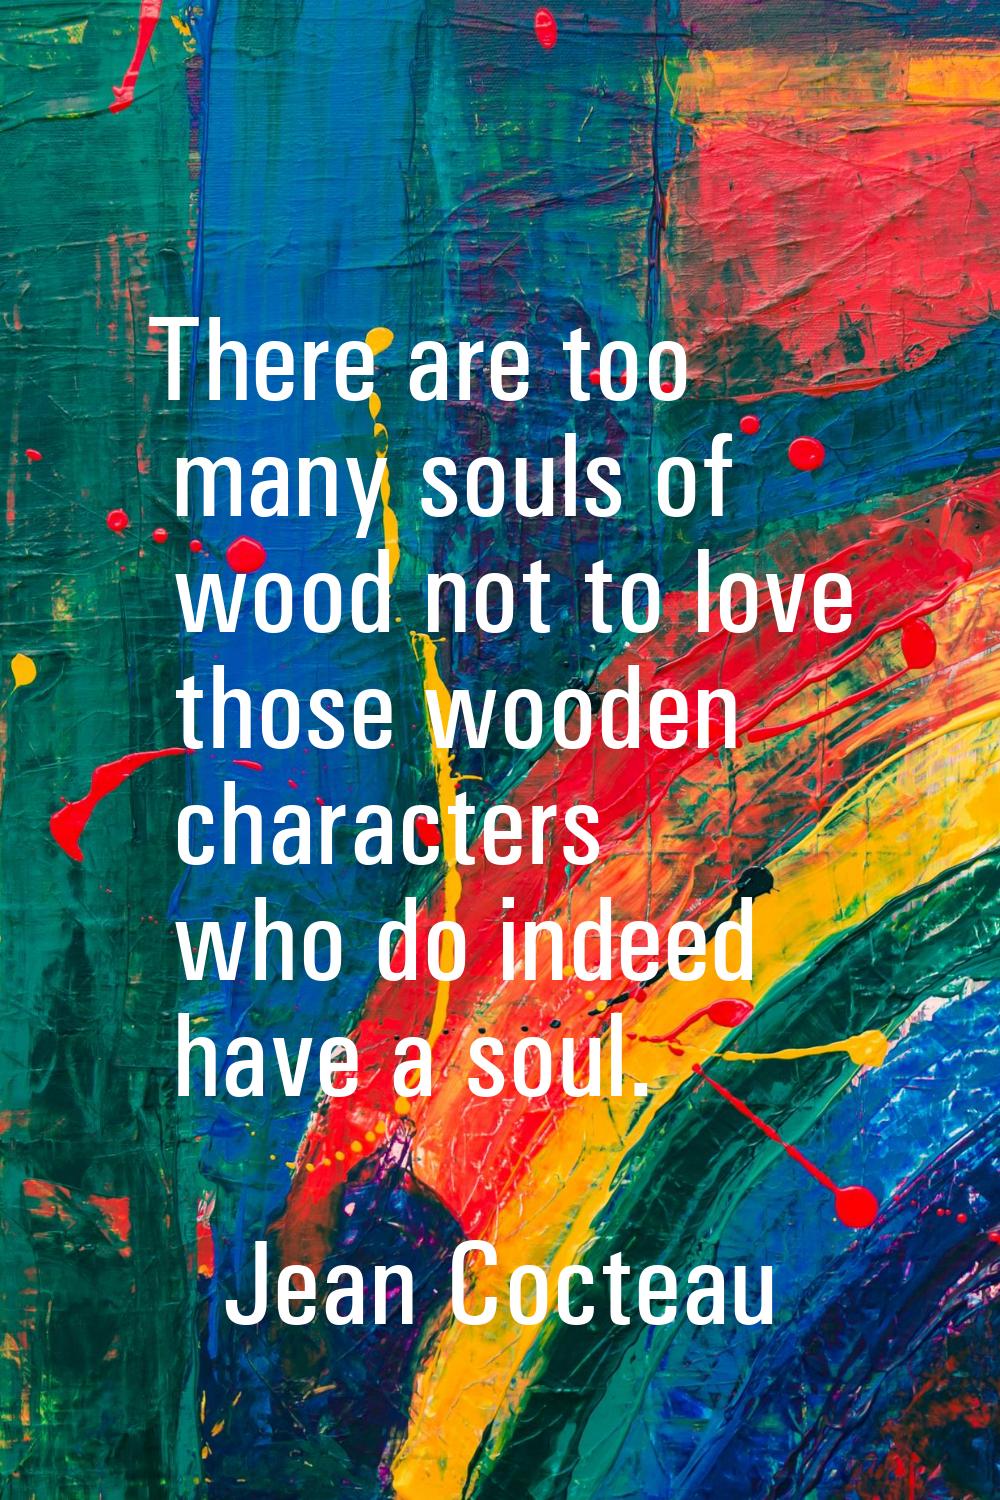 There are too many souls of wood not to love those wooden characters who do indeed have a soul.